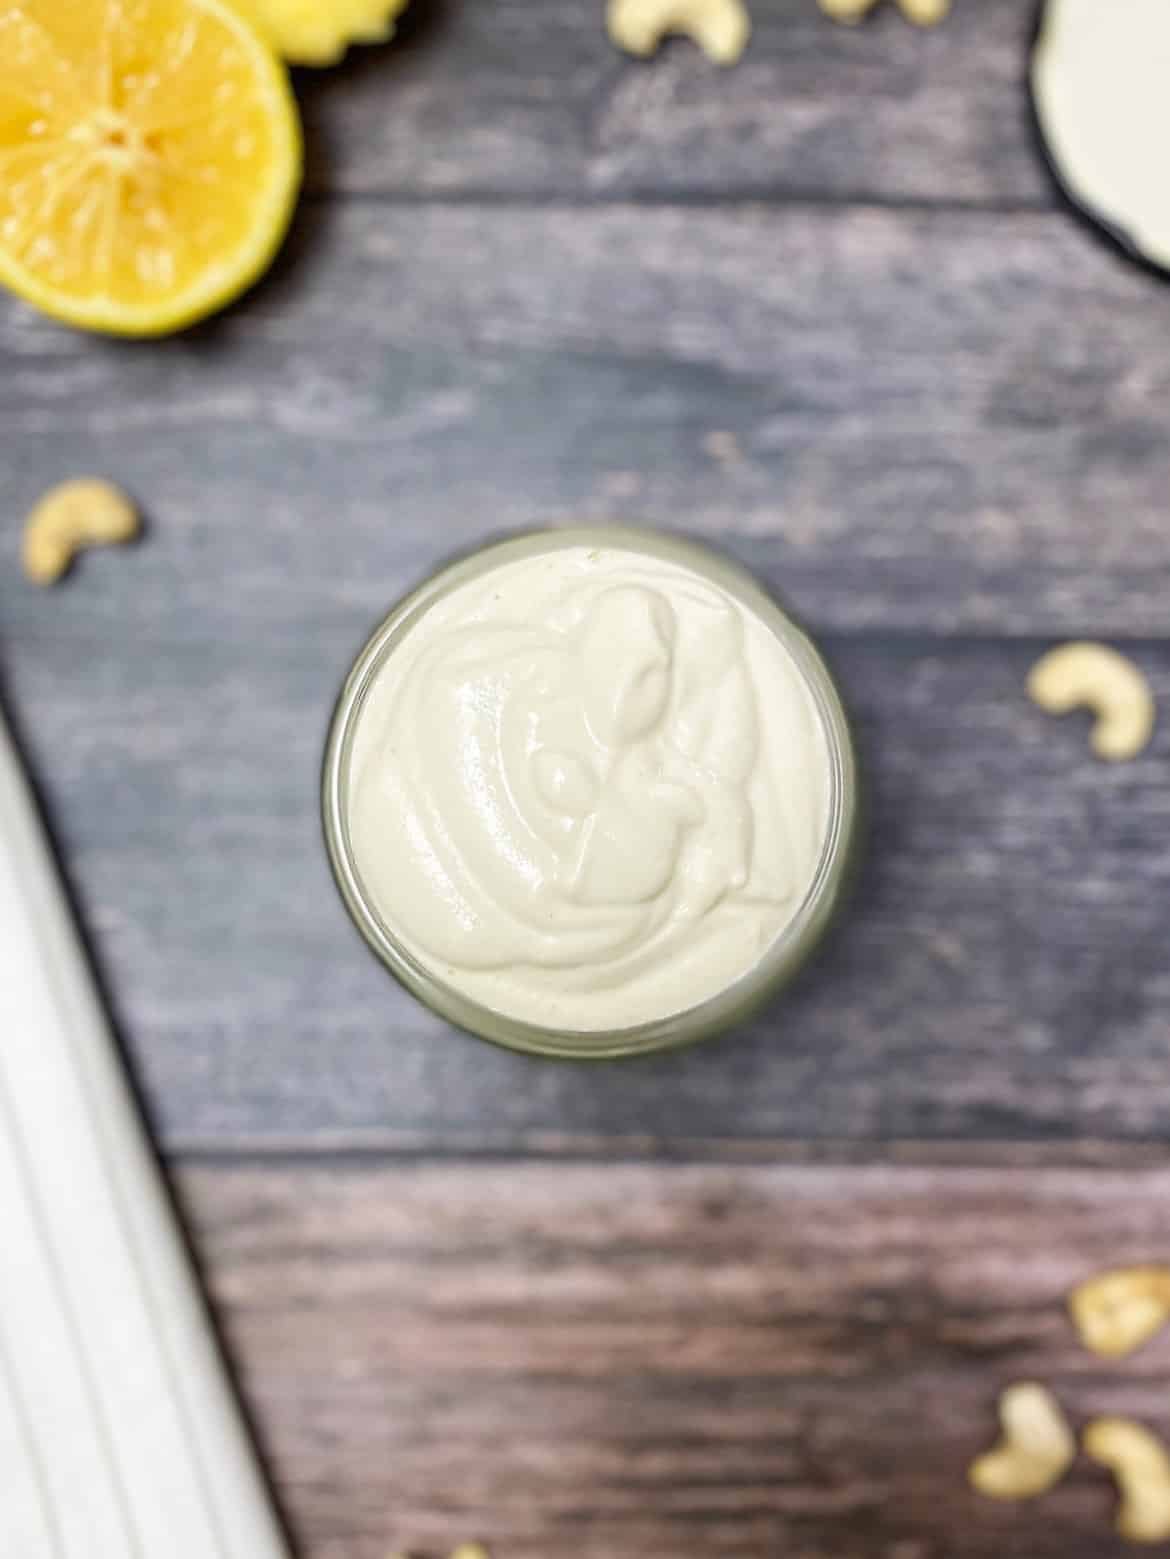 dairy free sour cream with cashews scattered around the jar